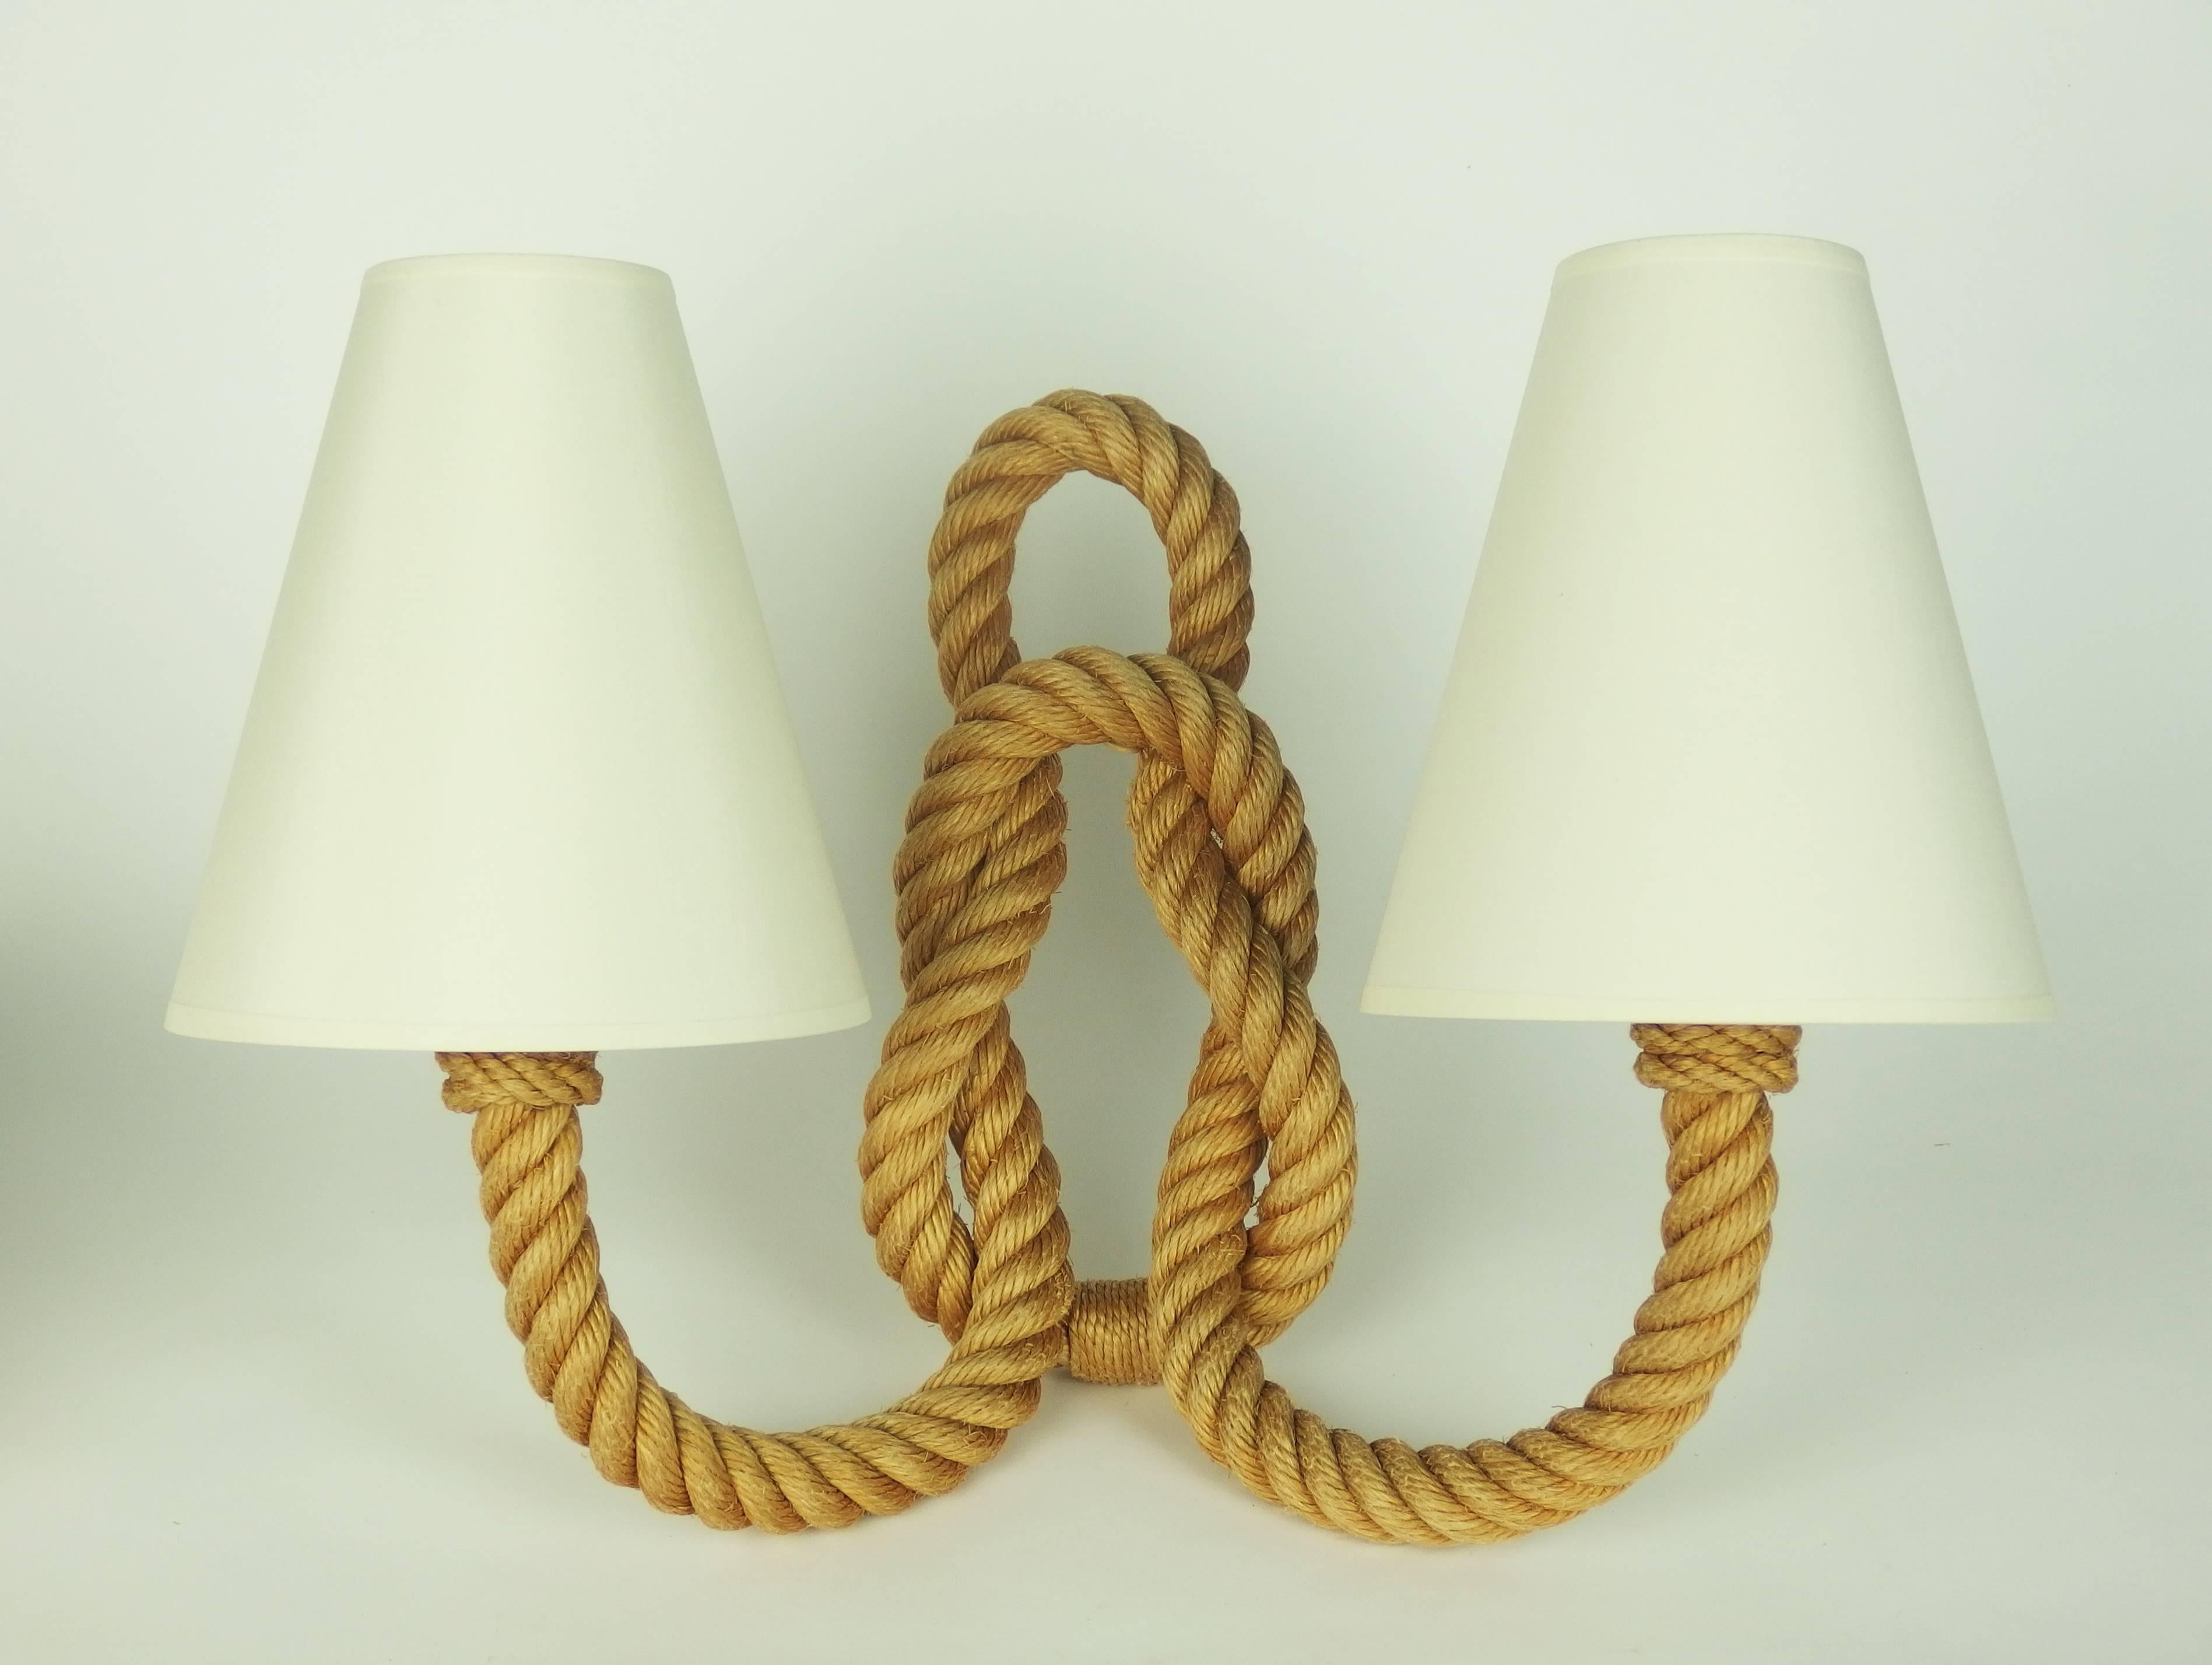 Two rope sconces manufactured in the 1960s by Adrien Audoux & Frida Minet.